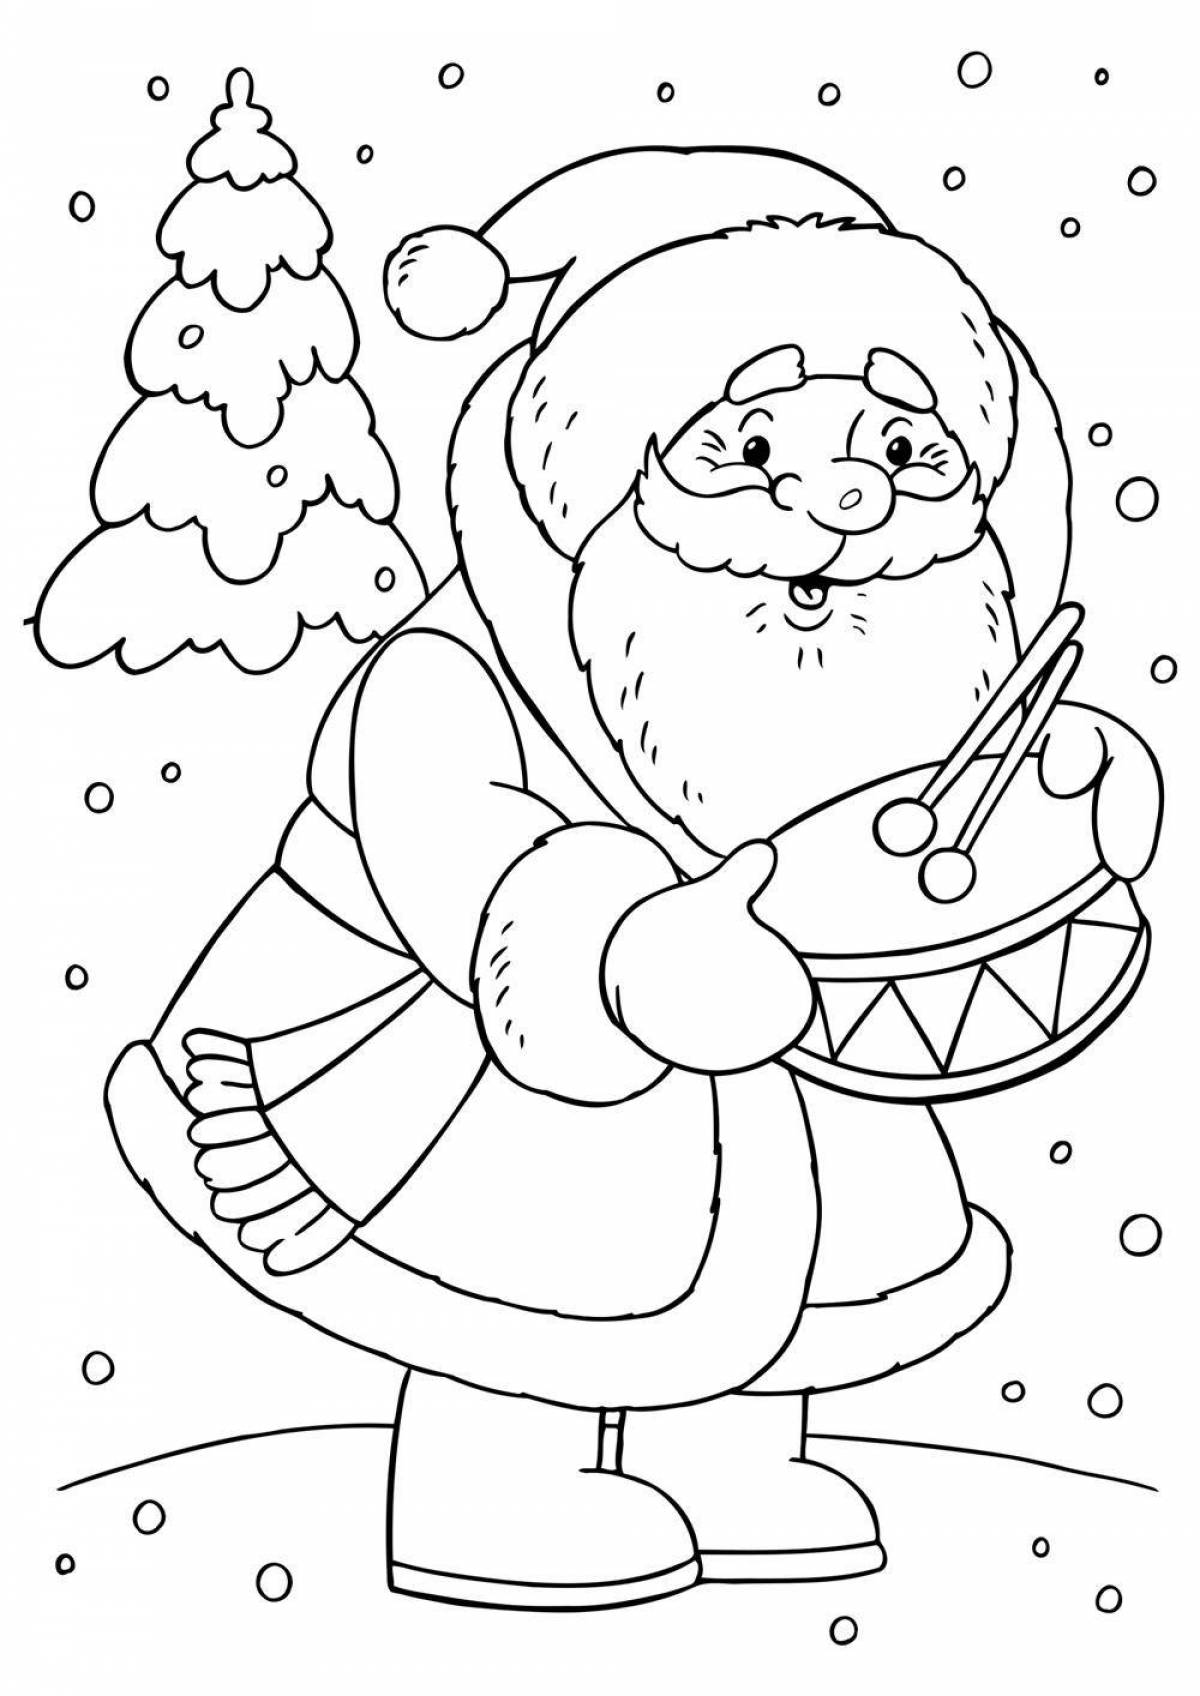 Big Christmas coloring book for 3-4 year olds